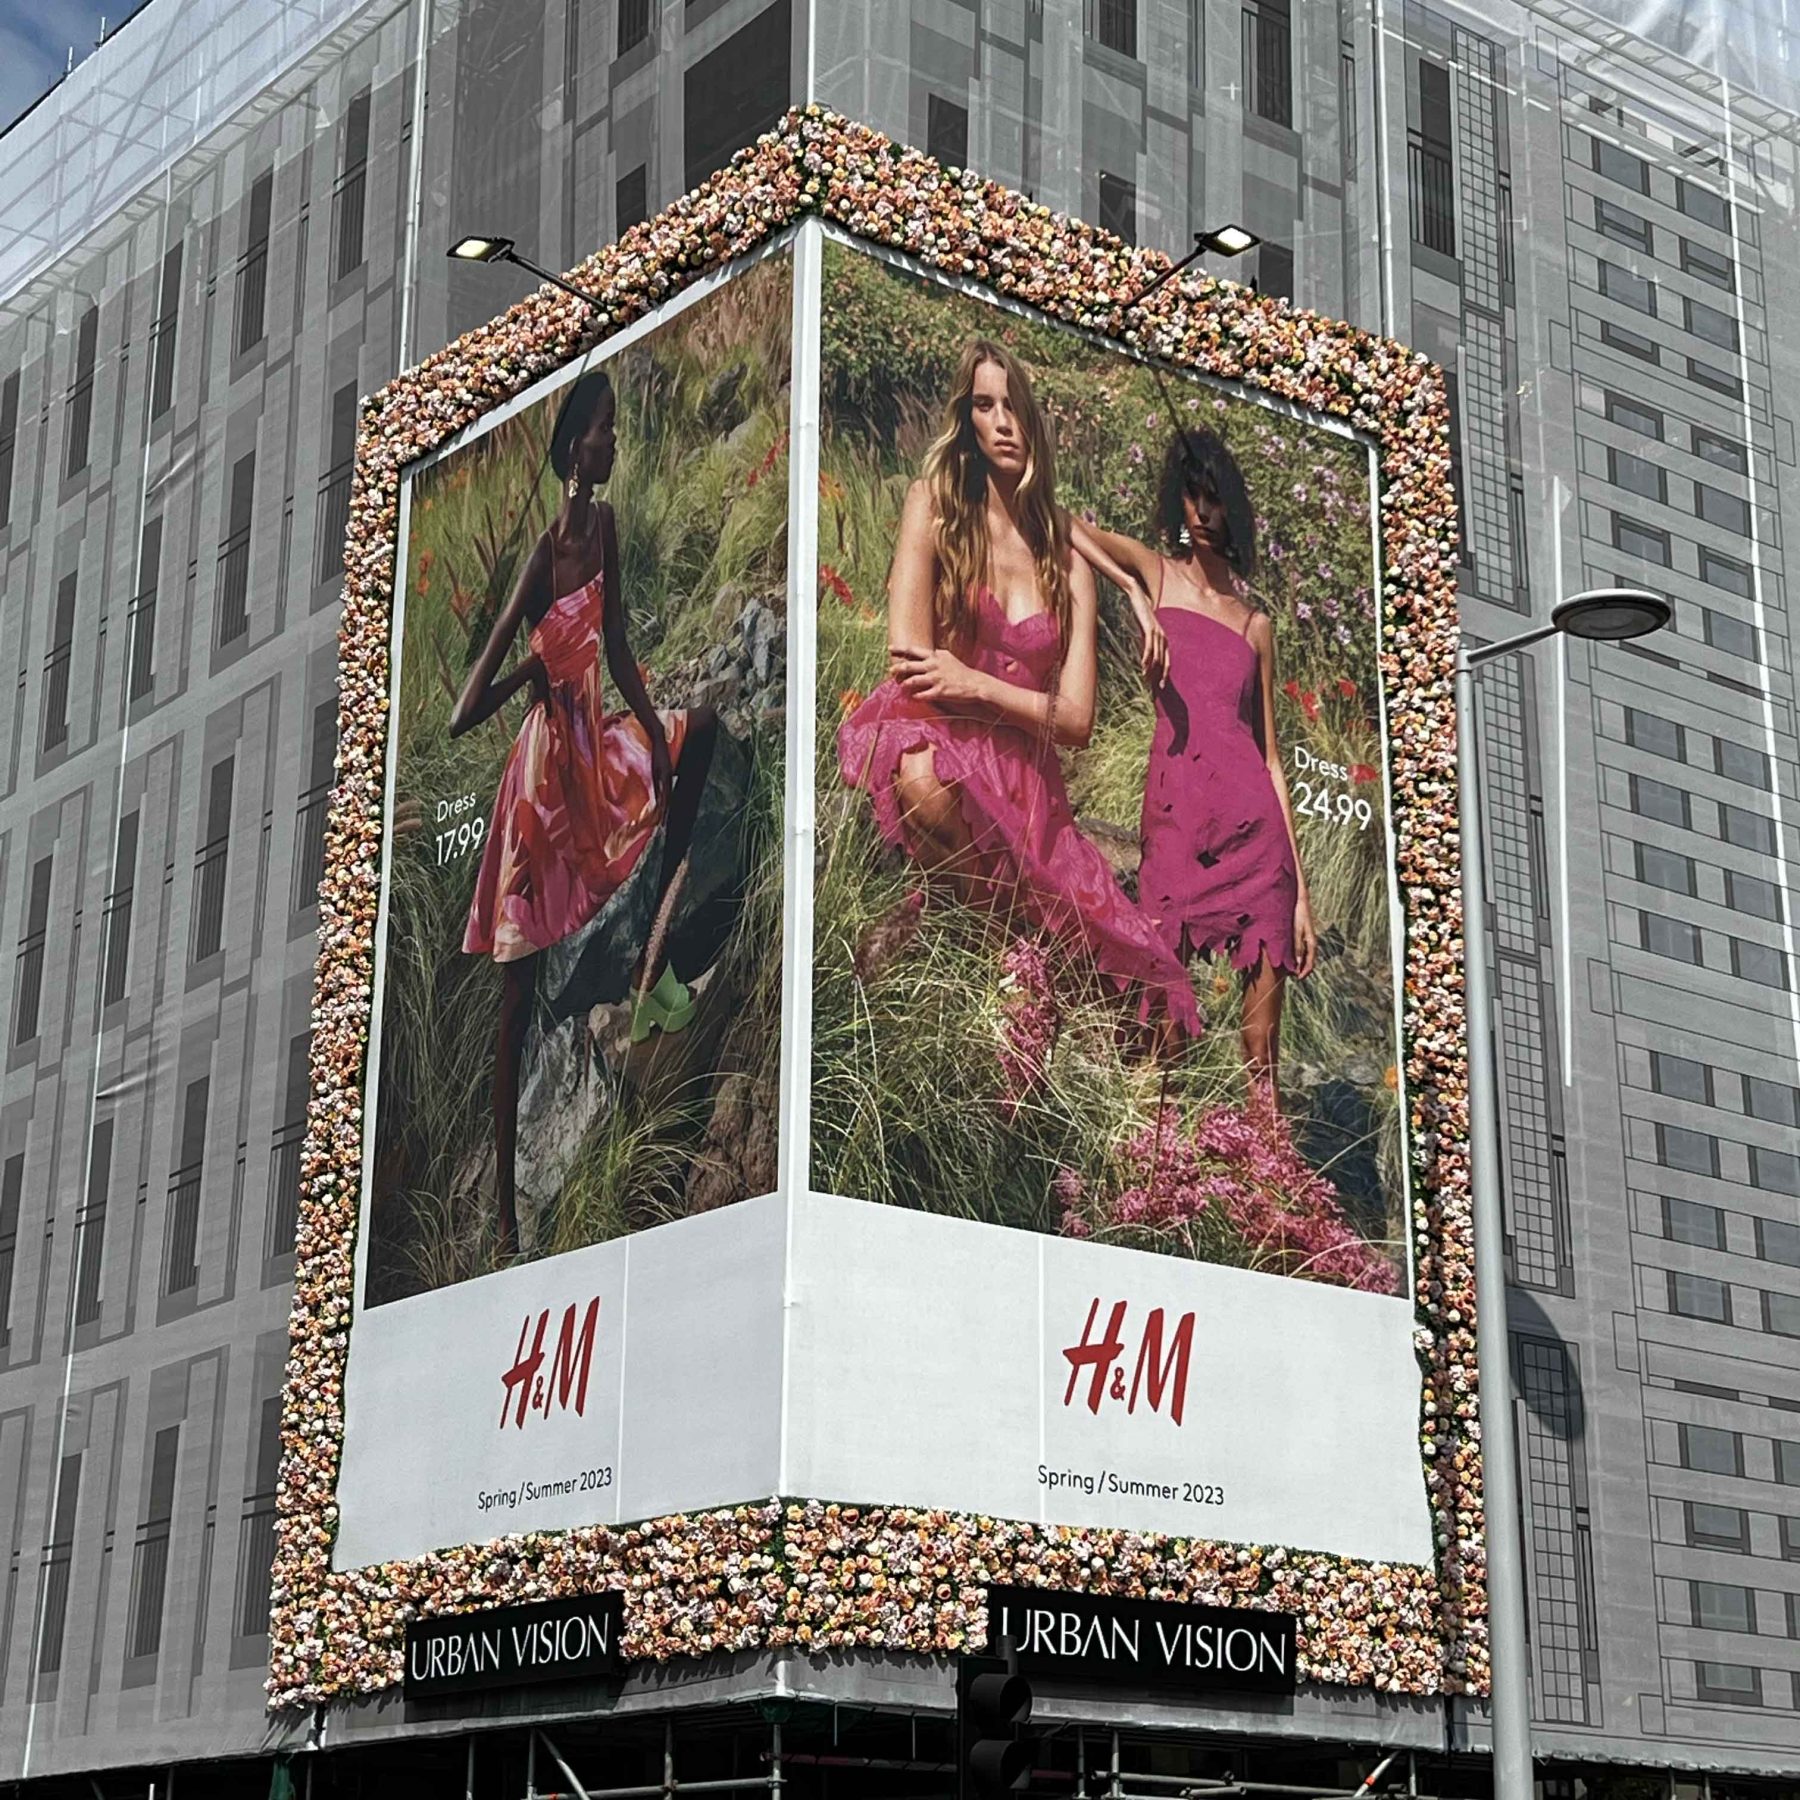 H&M commercial project using artificial flower tiles